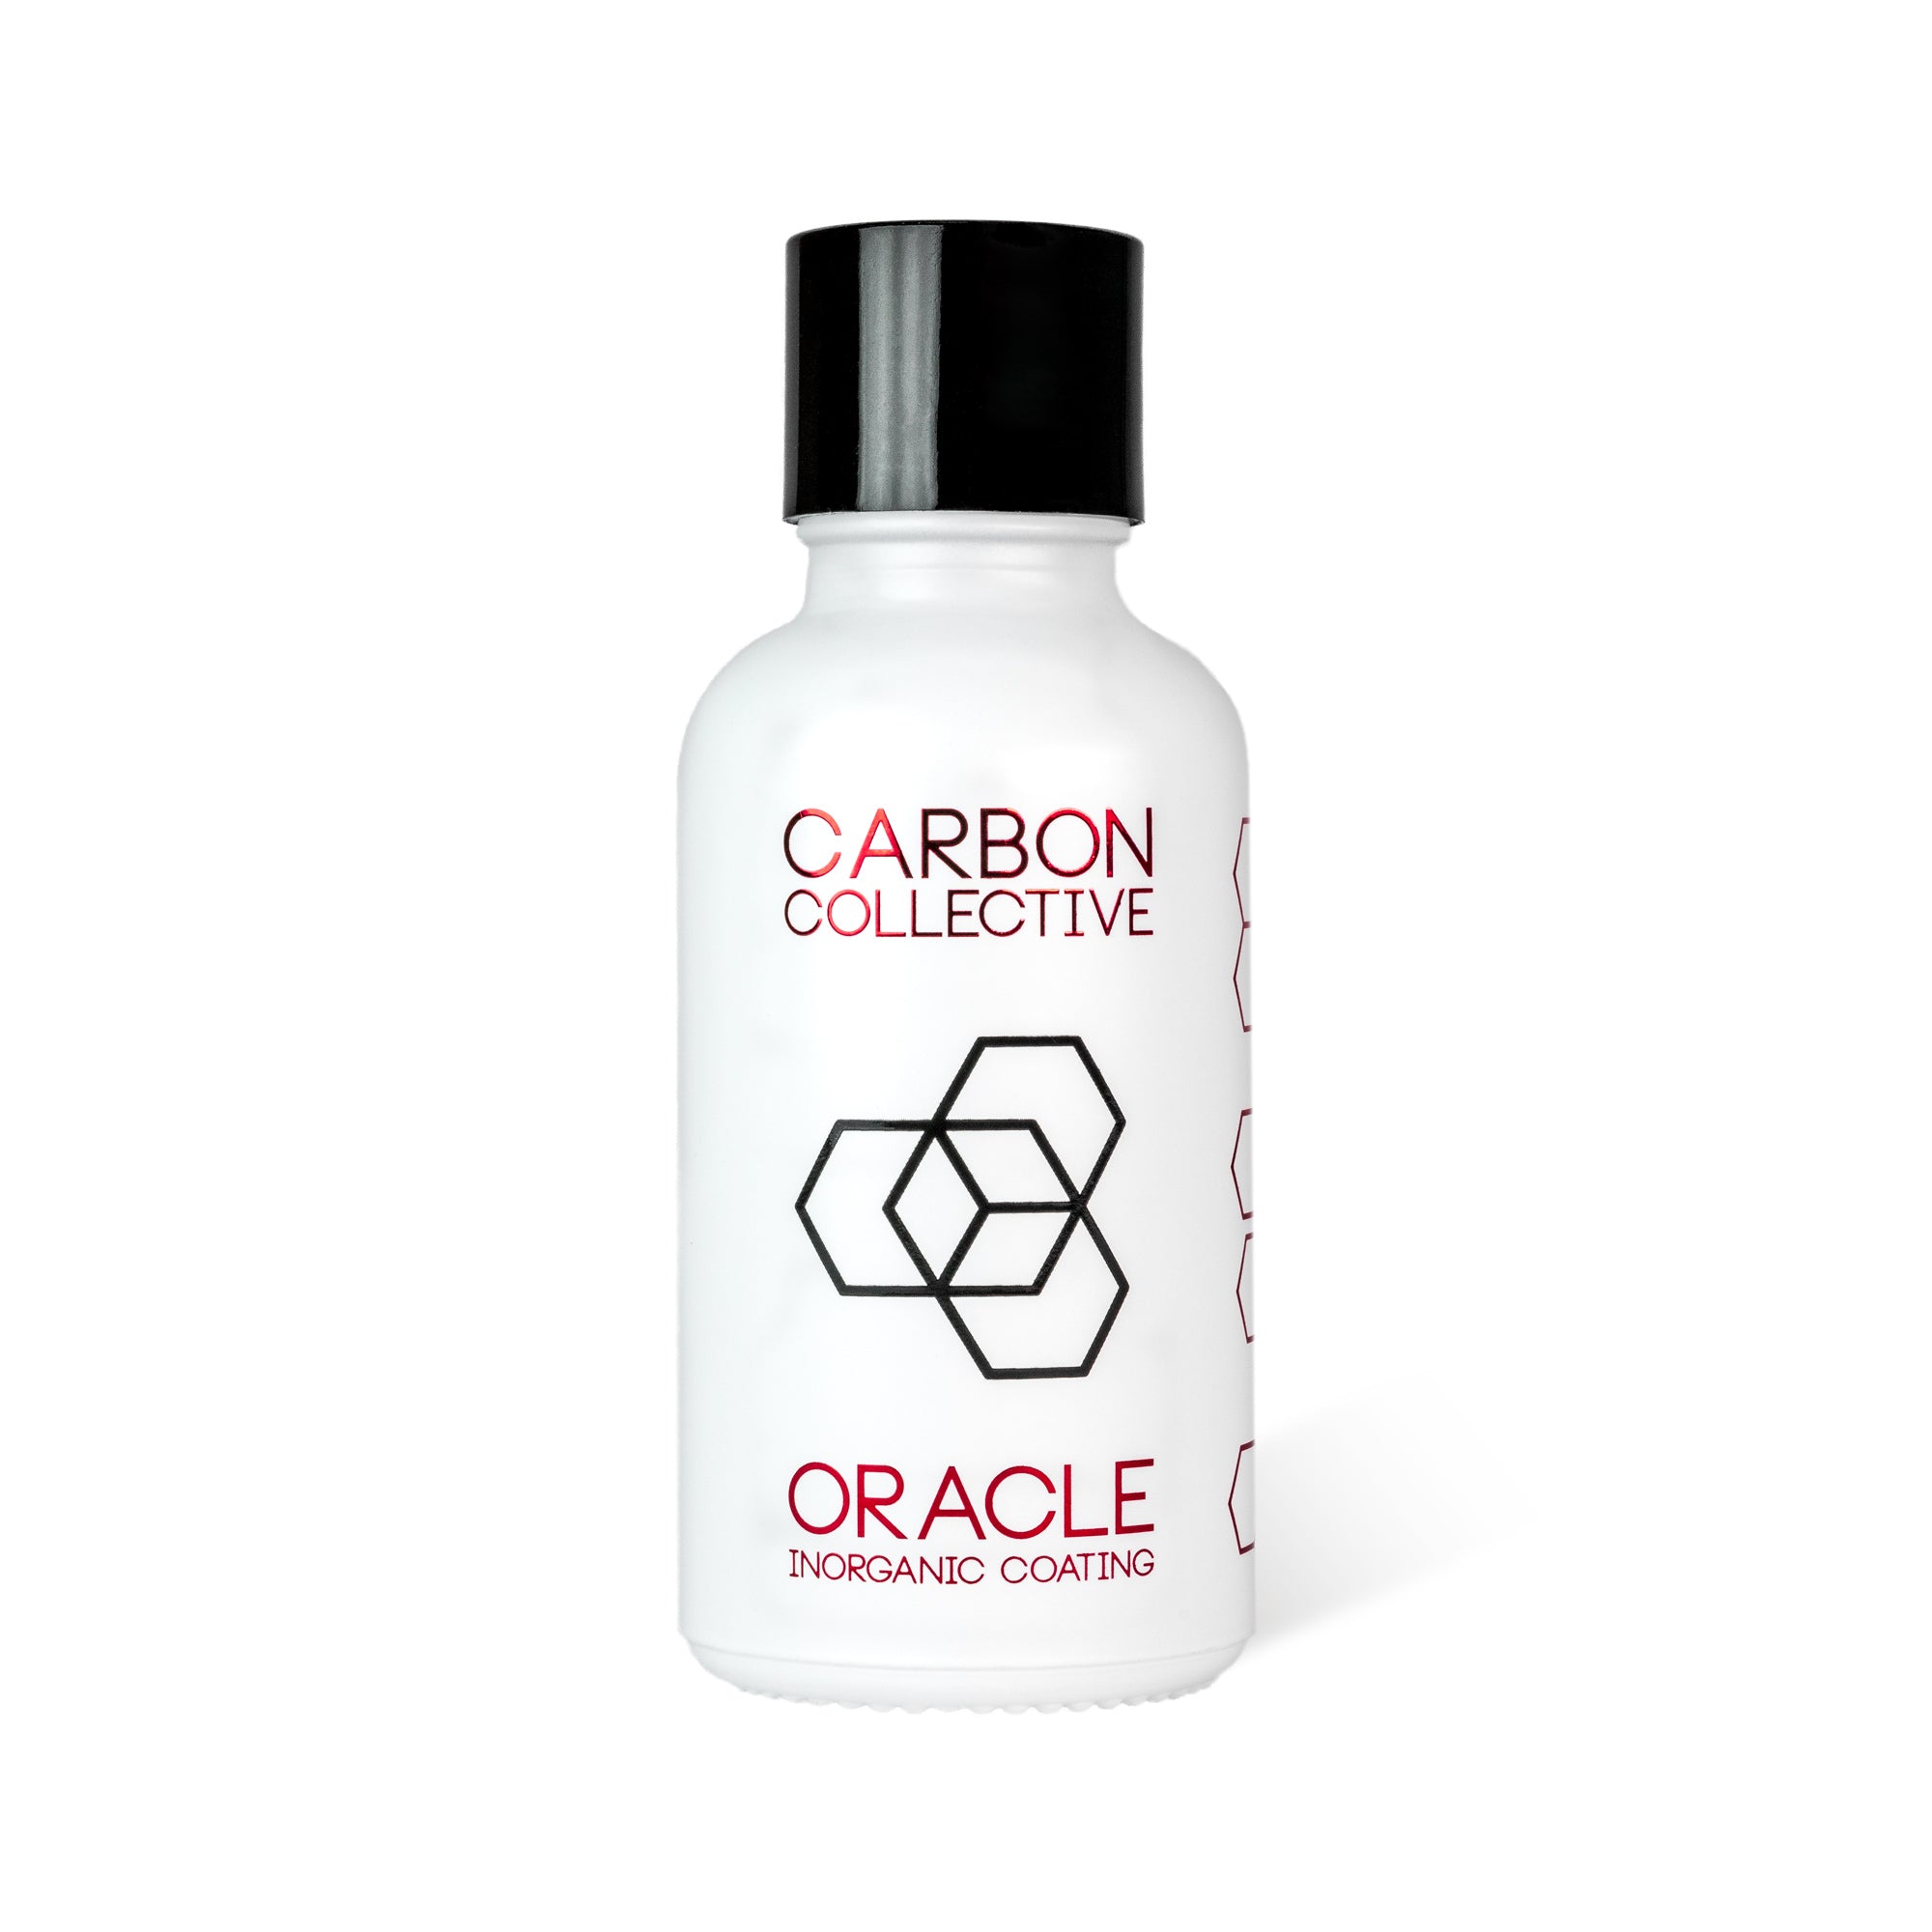 Carbon Collective Oracle Inorganic Paint Coating Kit 30ml